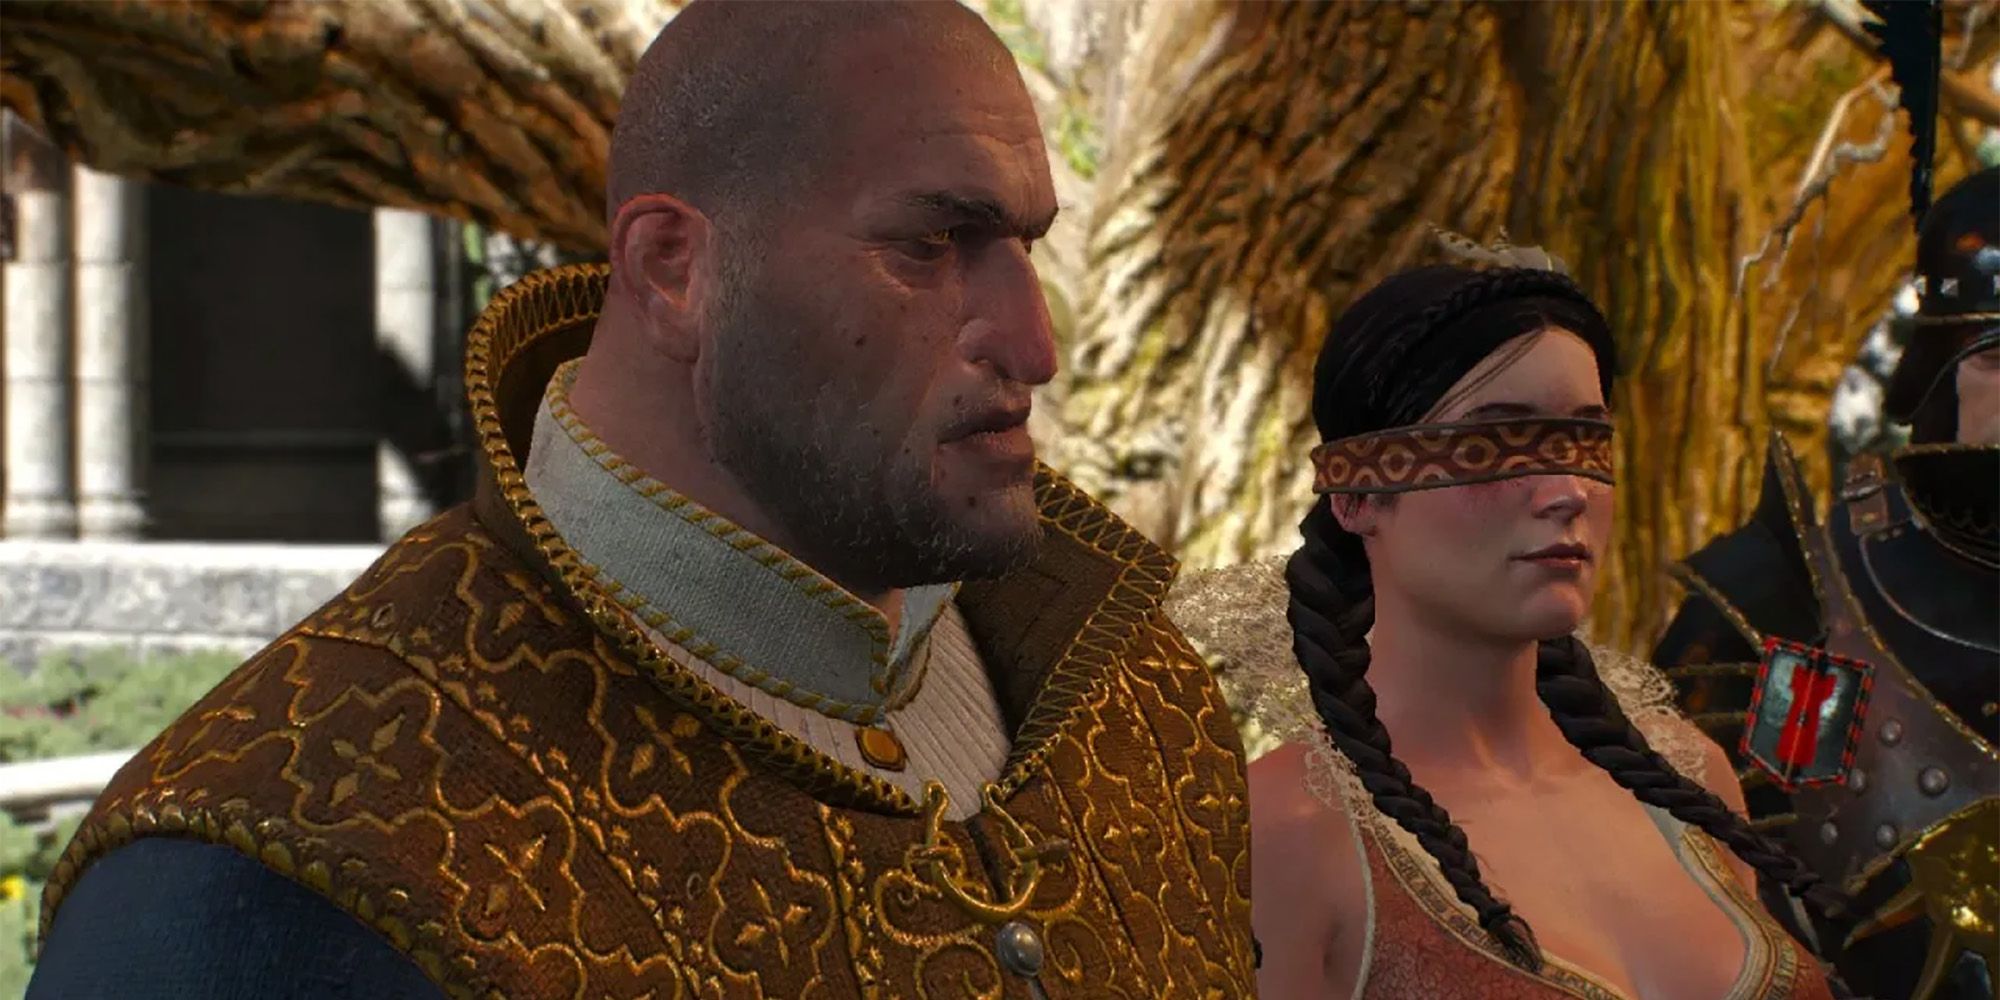 the-witcher-confirms-casting-for-dijkstra-philippa-eilhart-and-more